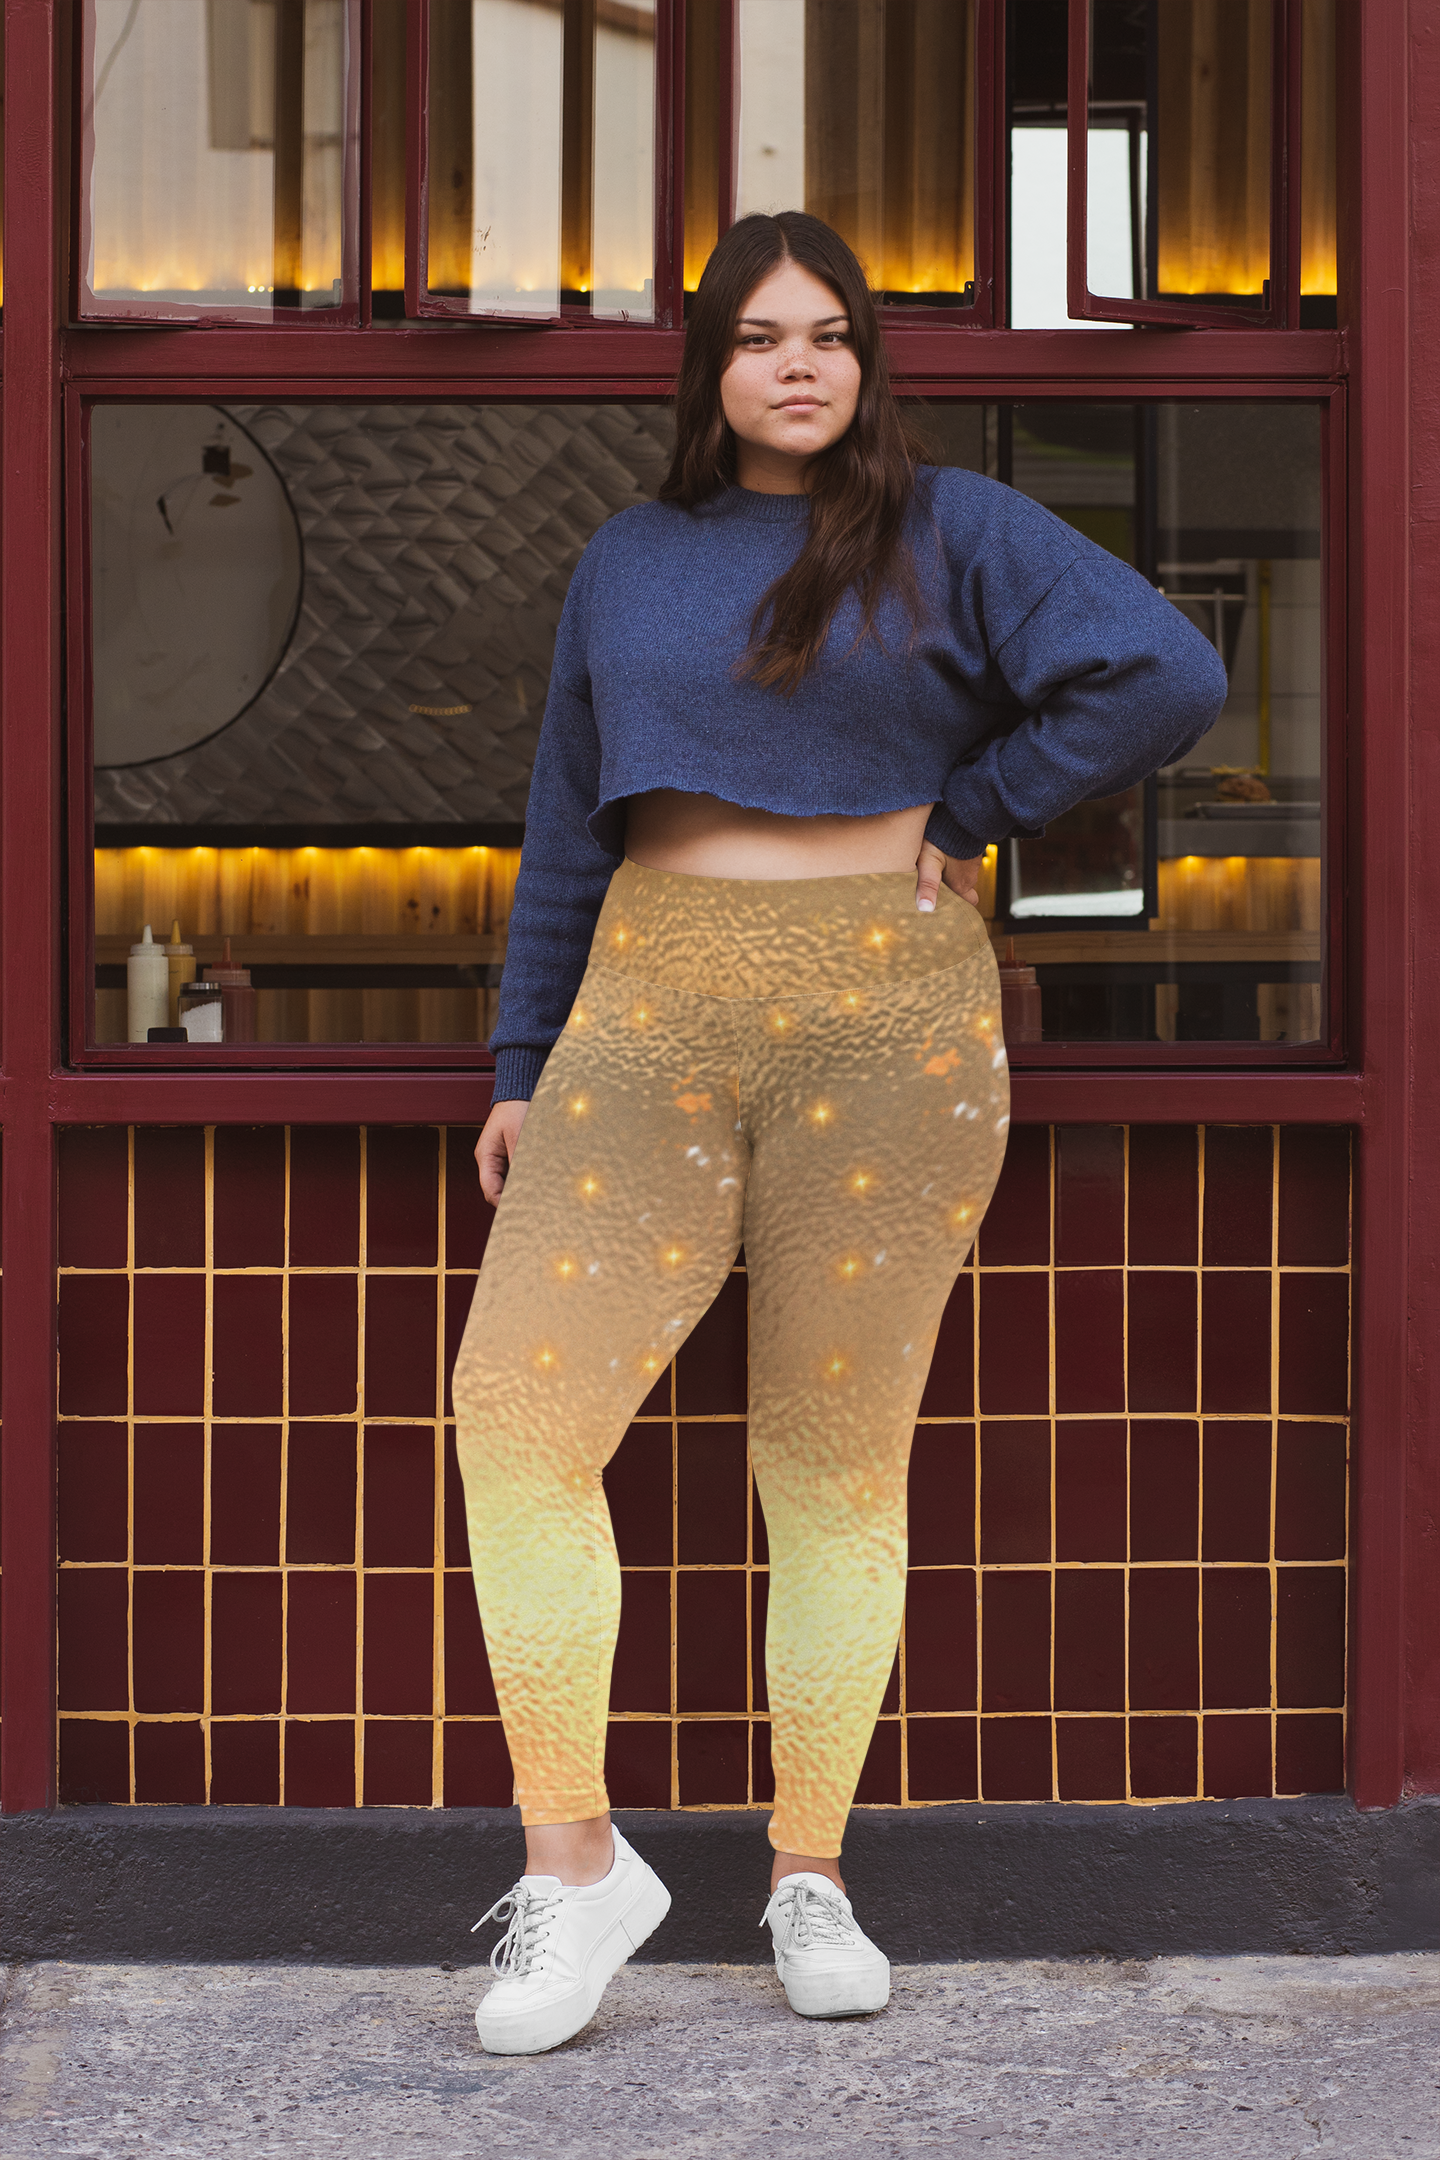 High Waisted Yoga Leggings Skinny fit, Double layer waistband, S-2XL. "Gold Collection"